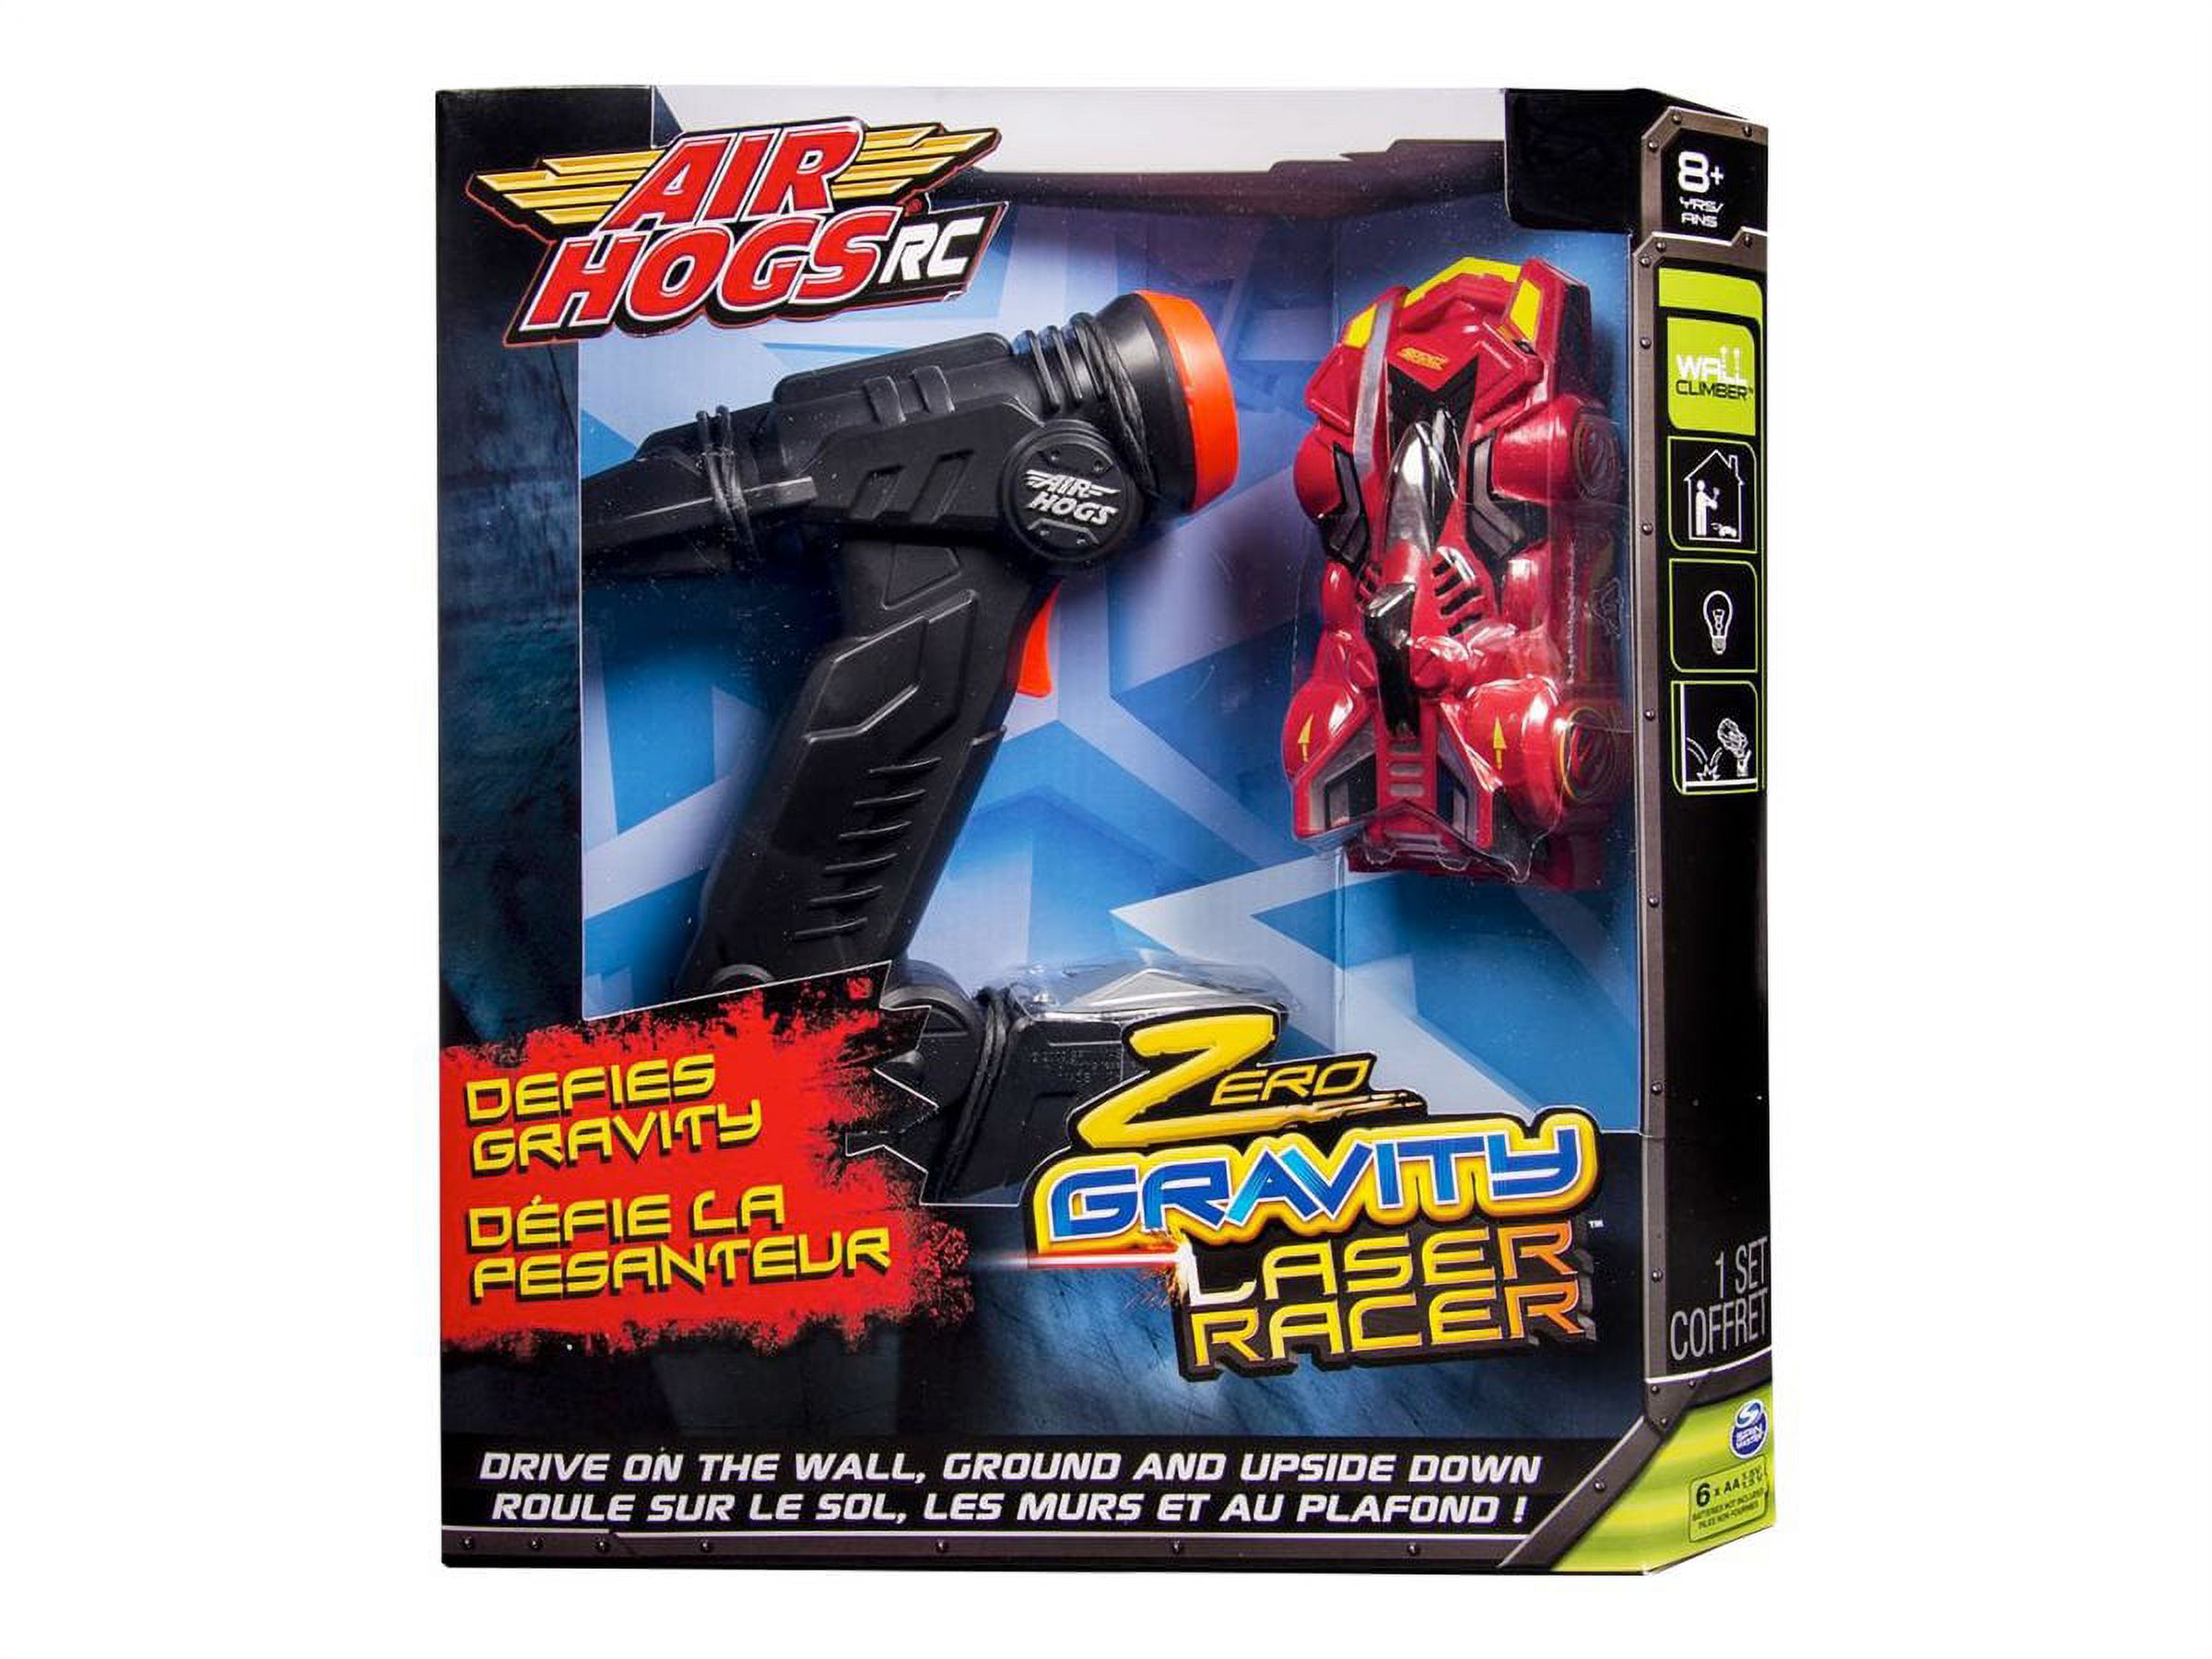 Air Hogs - Zero Gravity Laser Racer - RC - infrared - assorted design - image 1 of 2